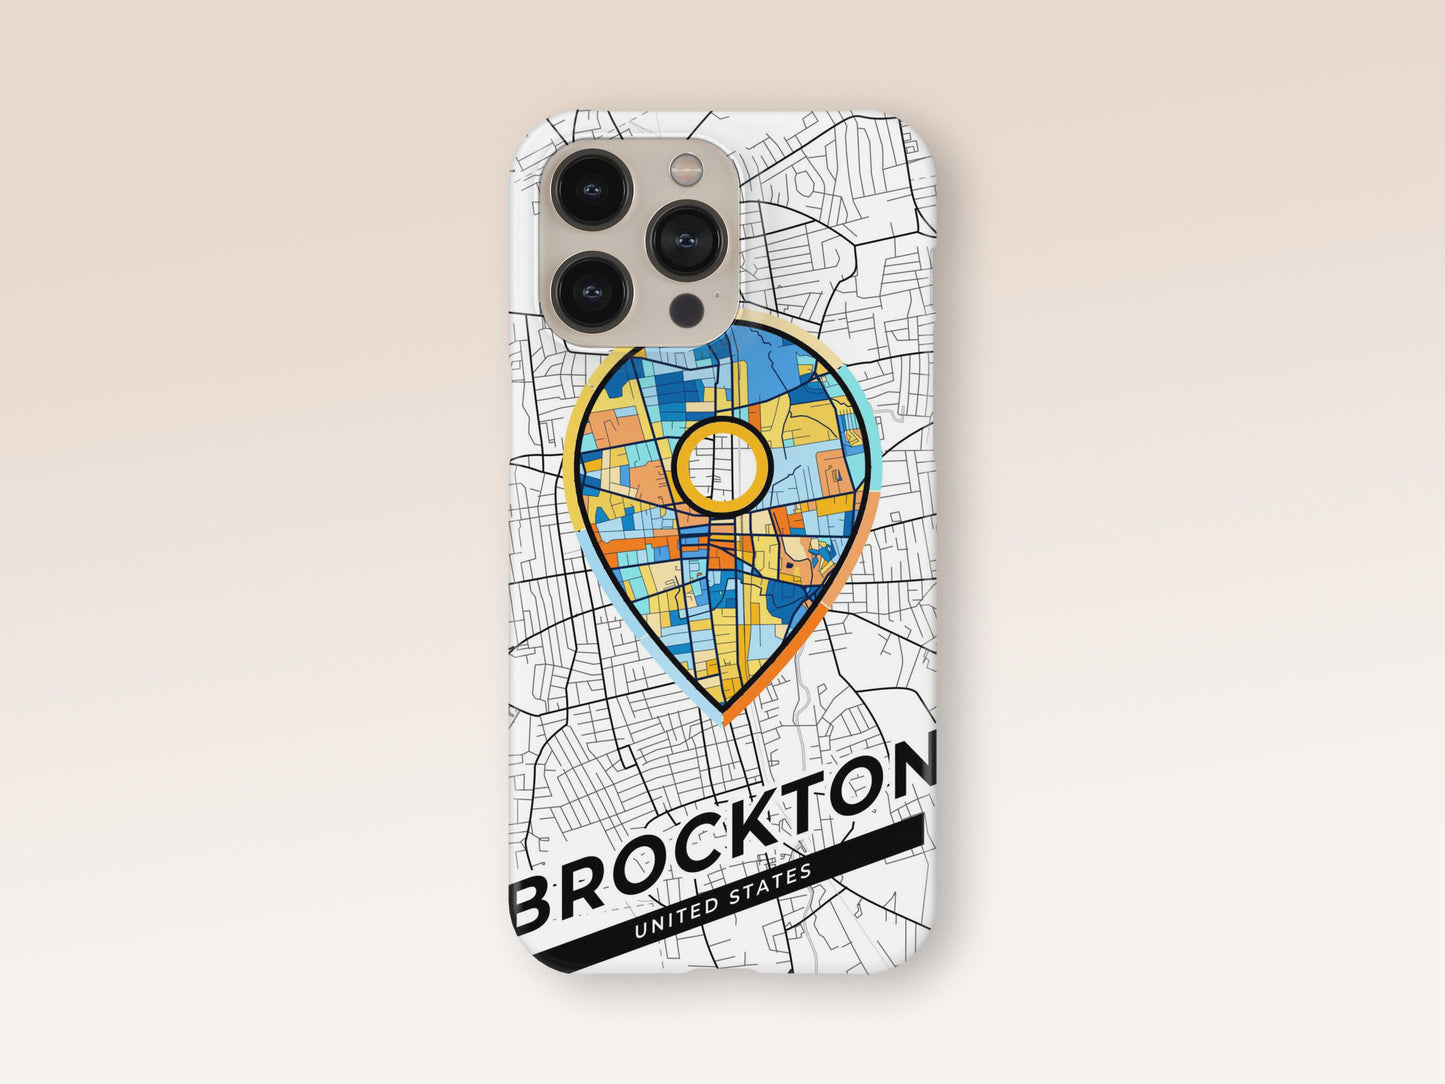 Brockton Massachusetts slim phone case with colorful icon. Birthday, wedding or housewarming gift. Couple match cases. 1